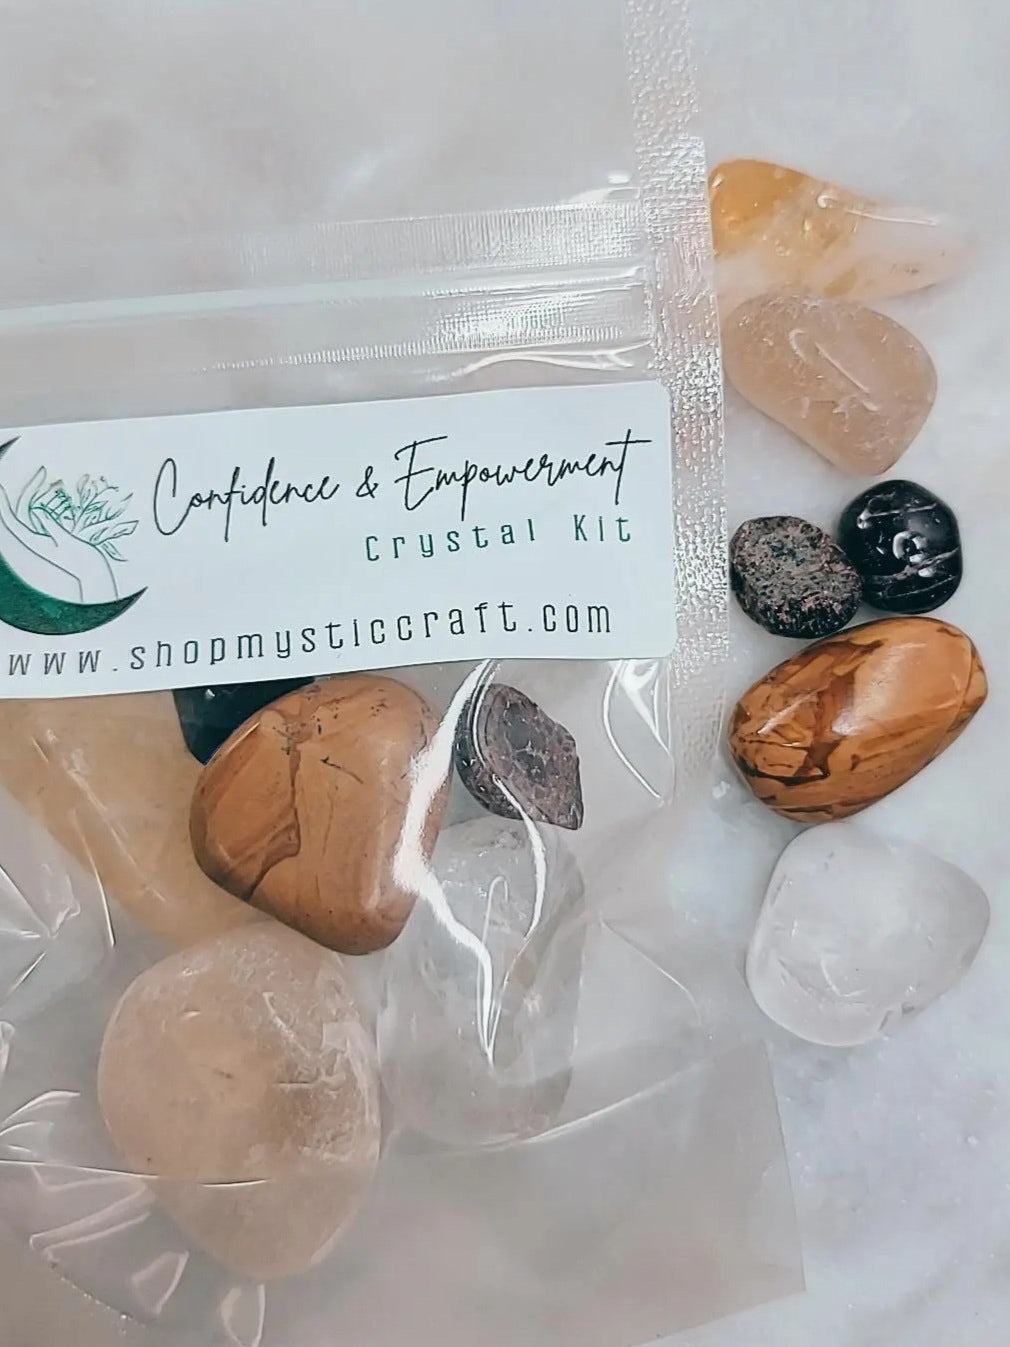 Confidence & Empowerment Crystal Kit